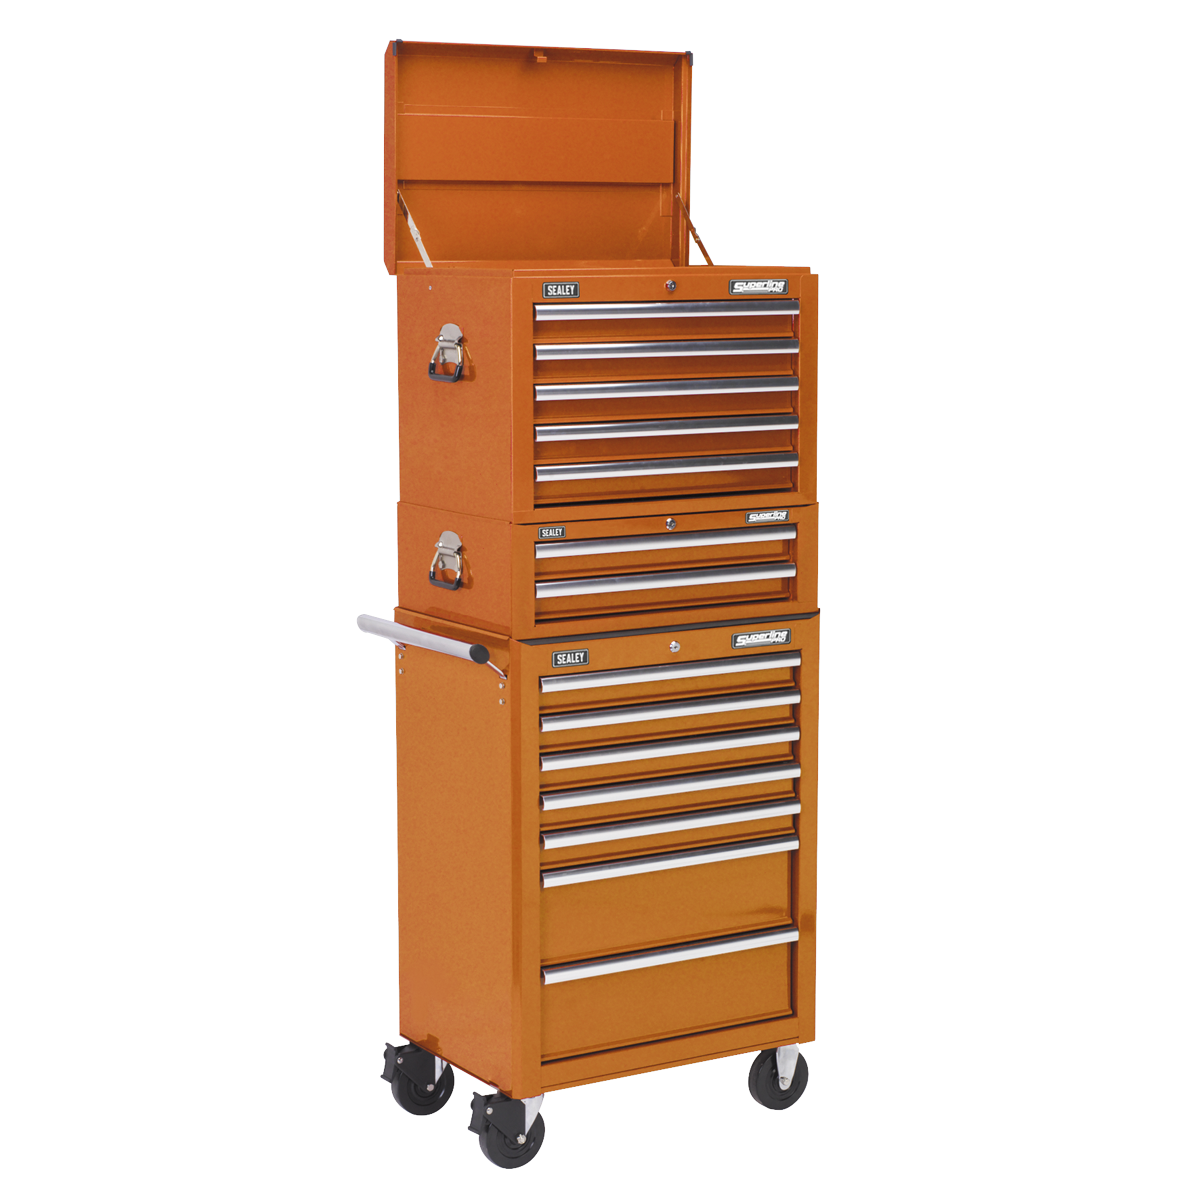 Topchest, Mid-Box & Rollcab Combination 14 Drawer with Ball-Bearing Slides - Orange - APSTACKTO - Farming Parts